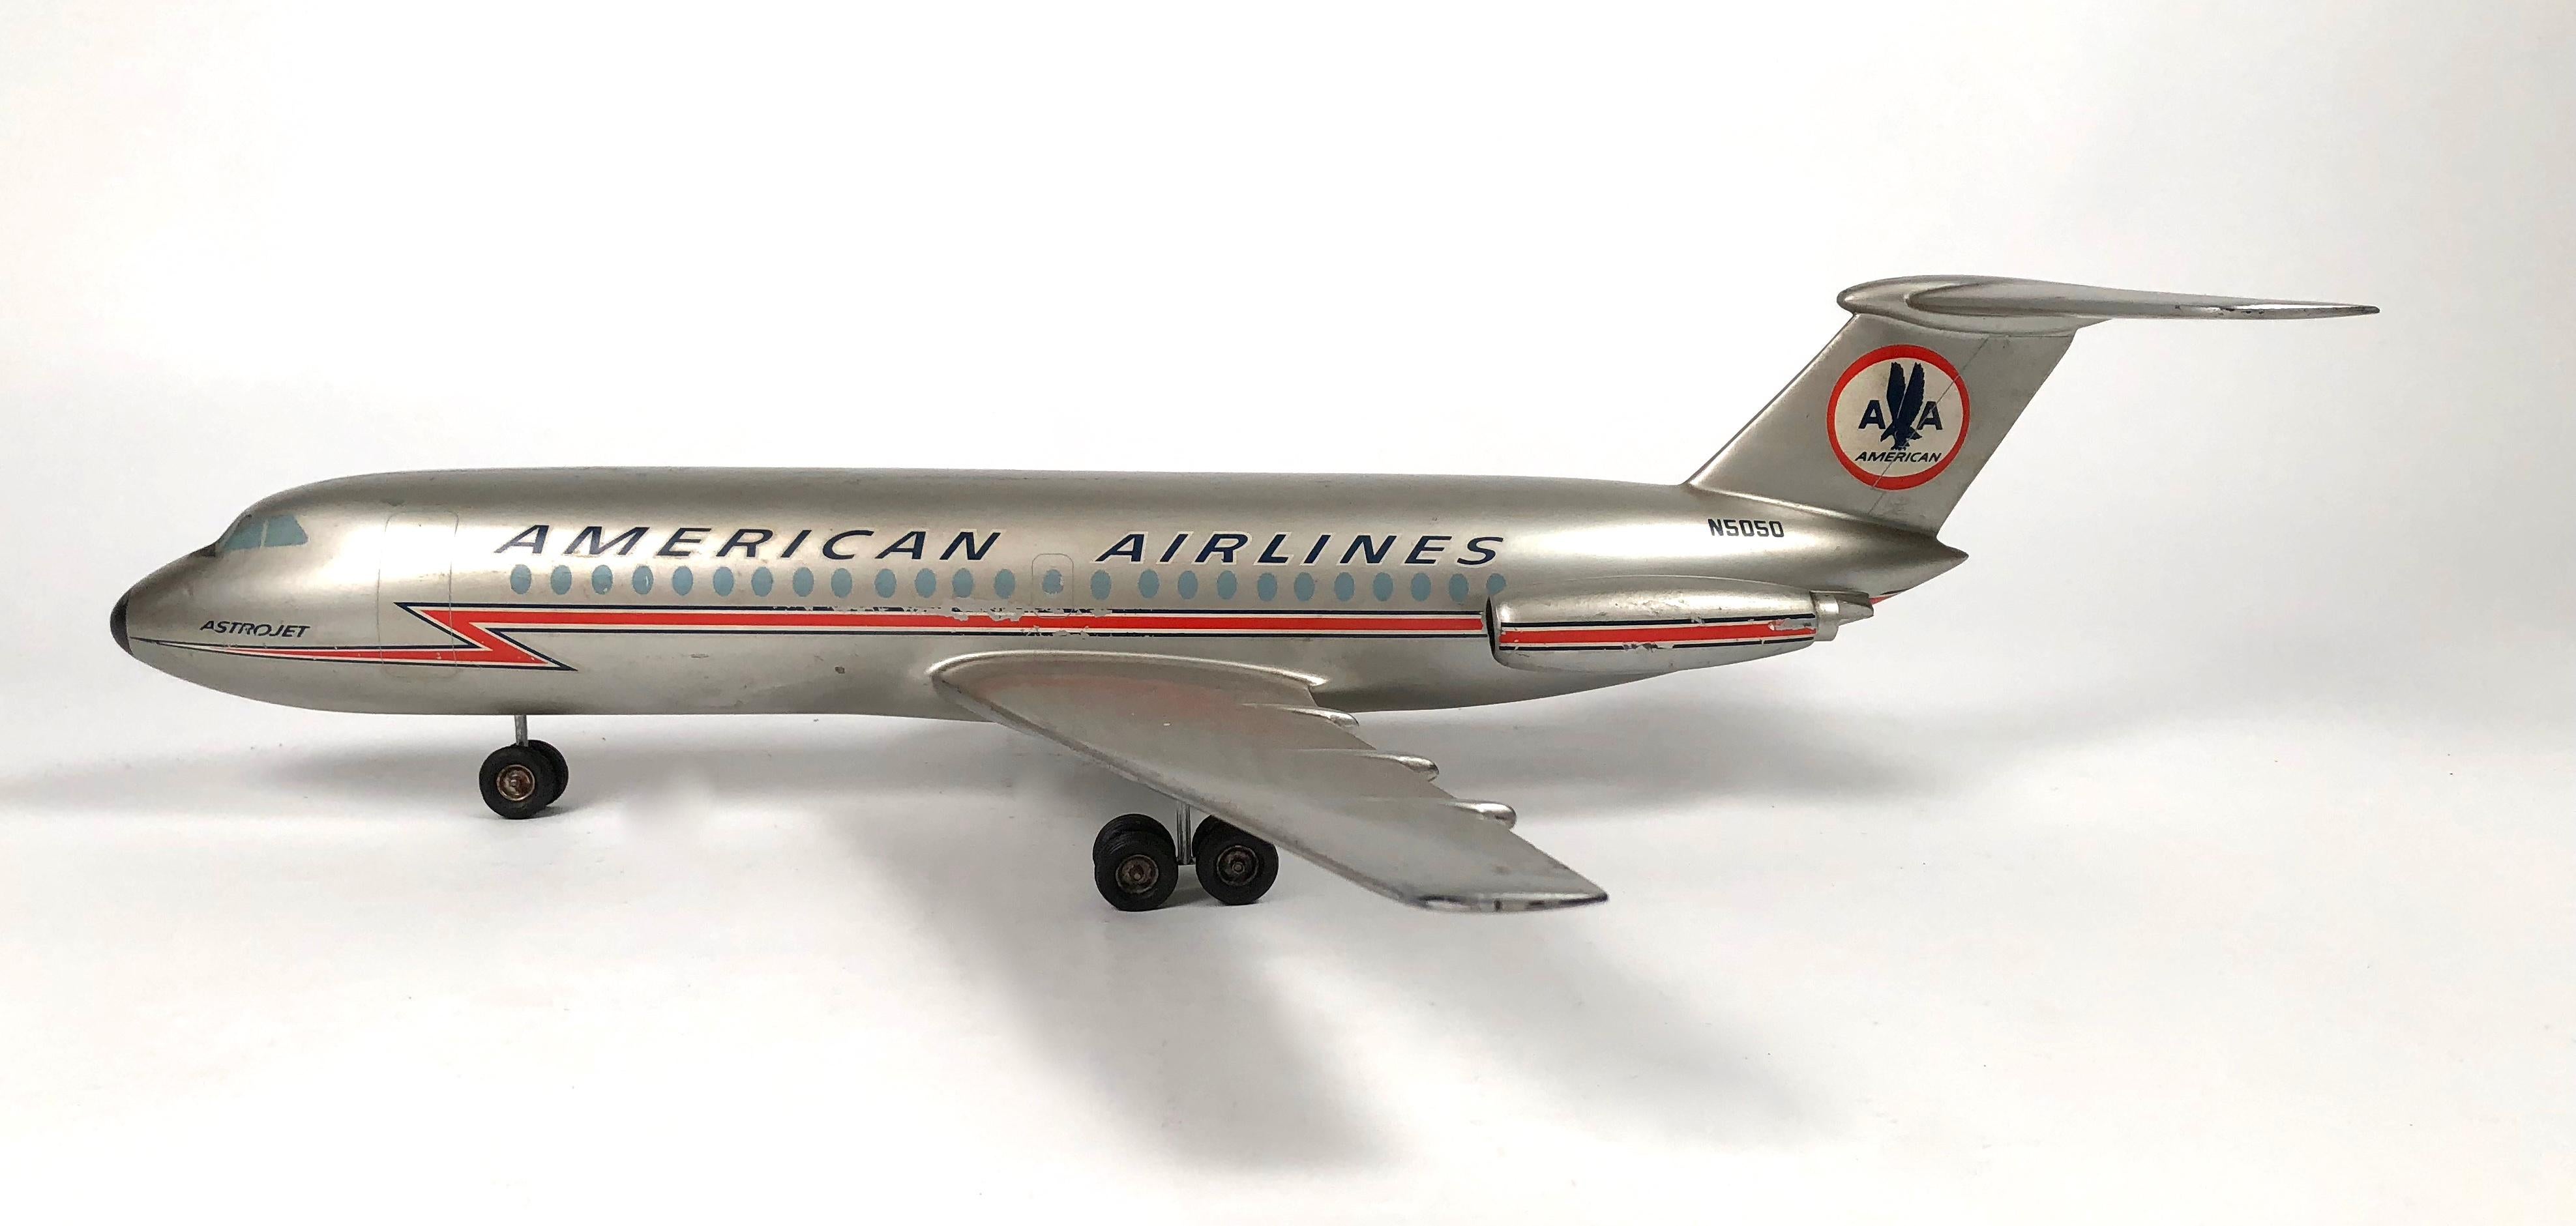 A vintage American Airlines Astrojet aviation model, circa 1950-1960s, in silver painted metal with aircraft livery in red, white and blue, the fuselage and wings with applied decals and extended landing gear. 

Provenance: The Collection of